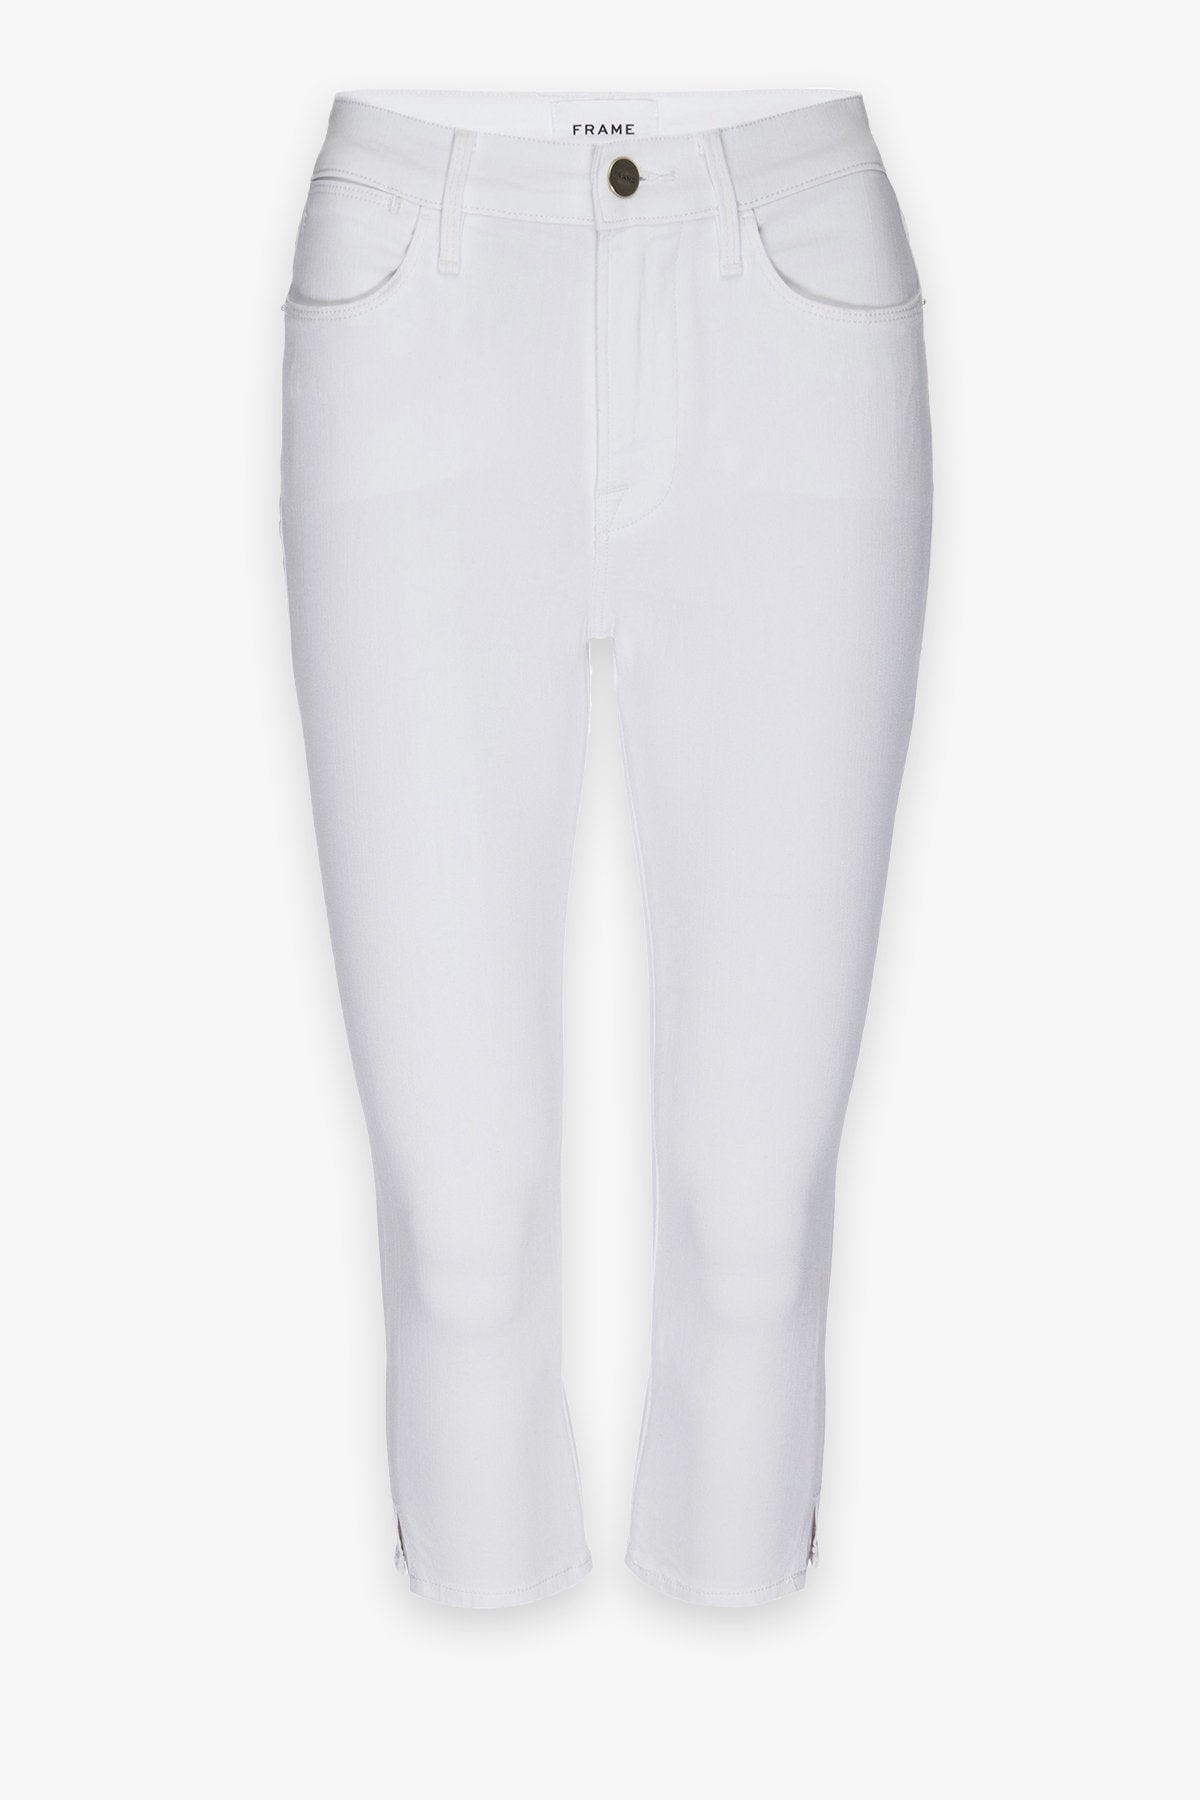 Le Pedal Cropped Jean in Blanc - shop-olivia.com